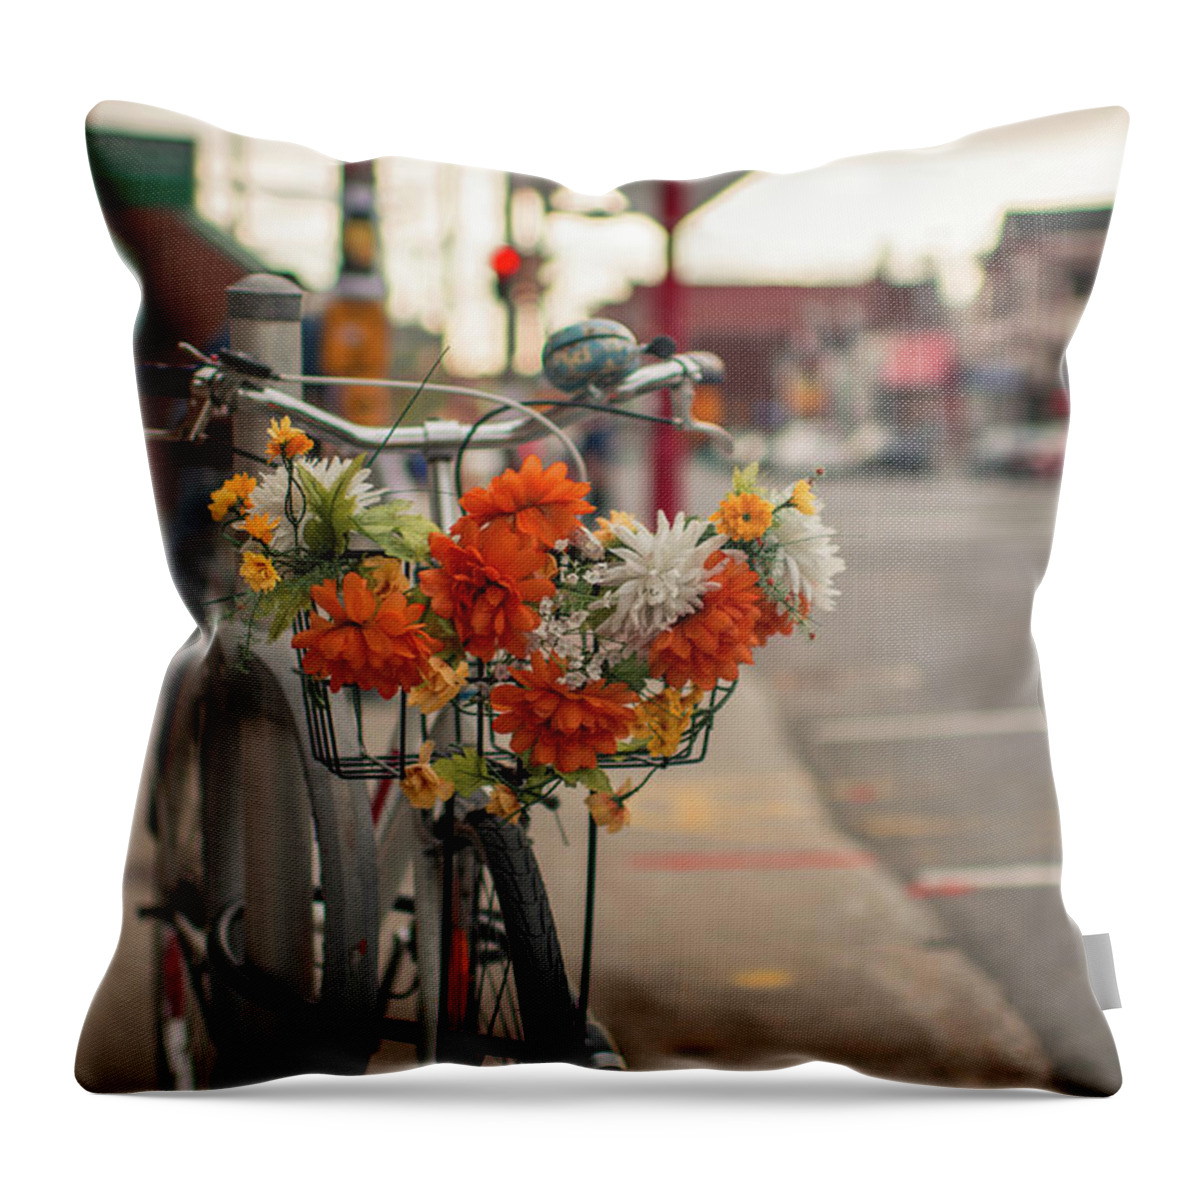 Silence Throw Pillow featuring the photograph Bicycle And Floral Decorated Basket by Preappy